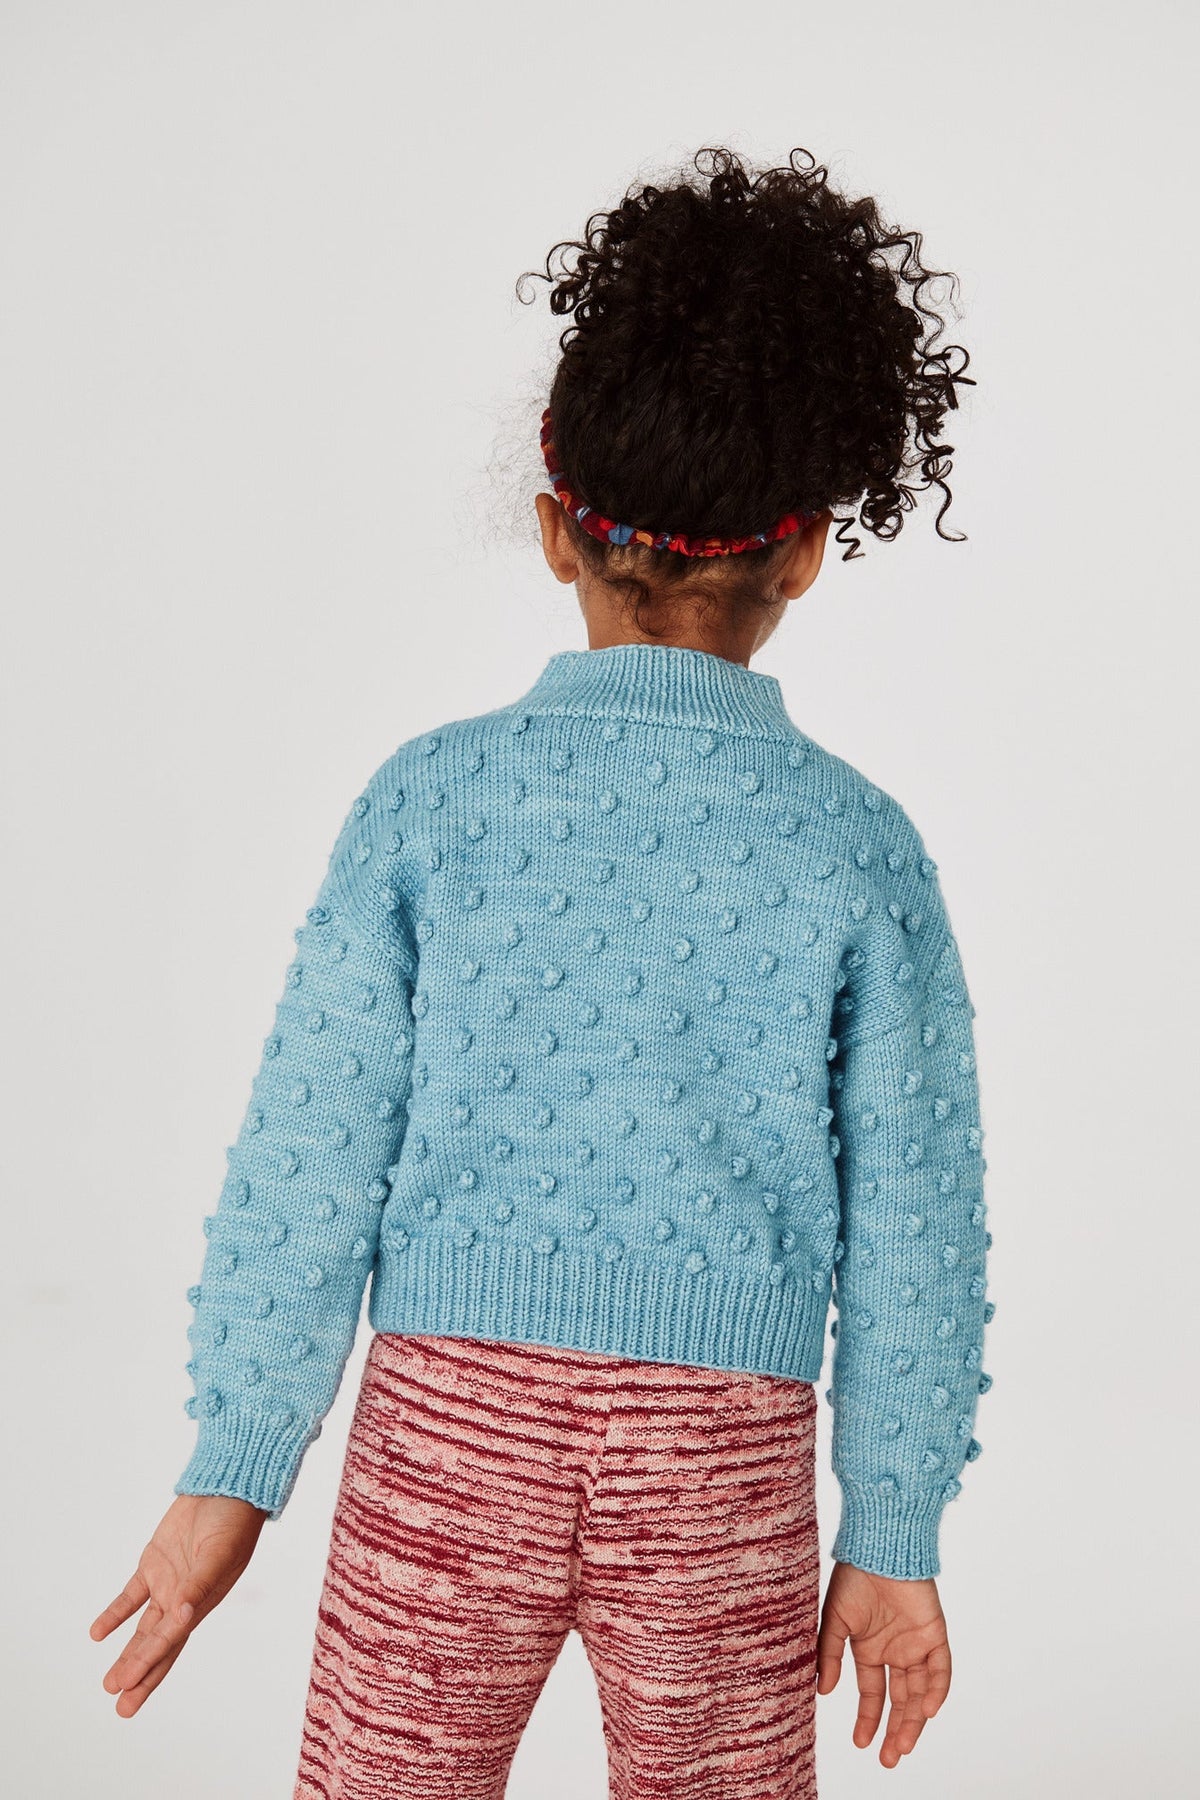 Mock Neck Popcorn Sweater - Faded Denim+Model is 45 inches tall, 44lbs, wearing a size 4y